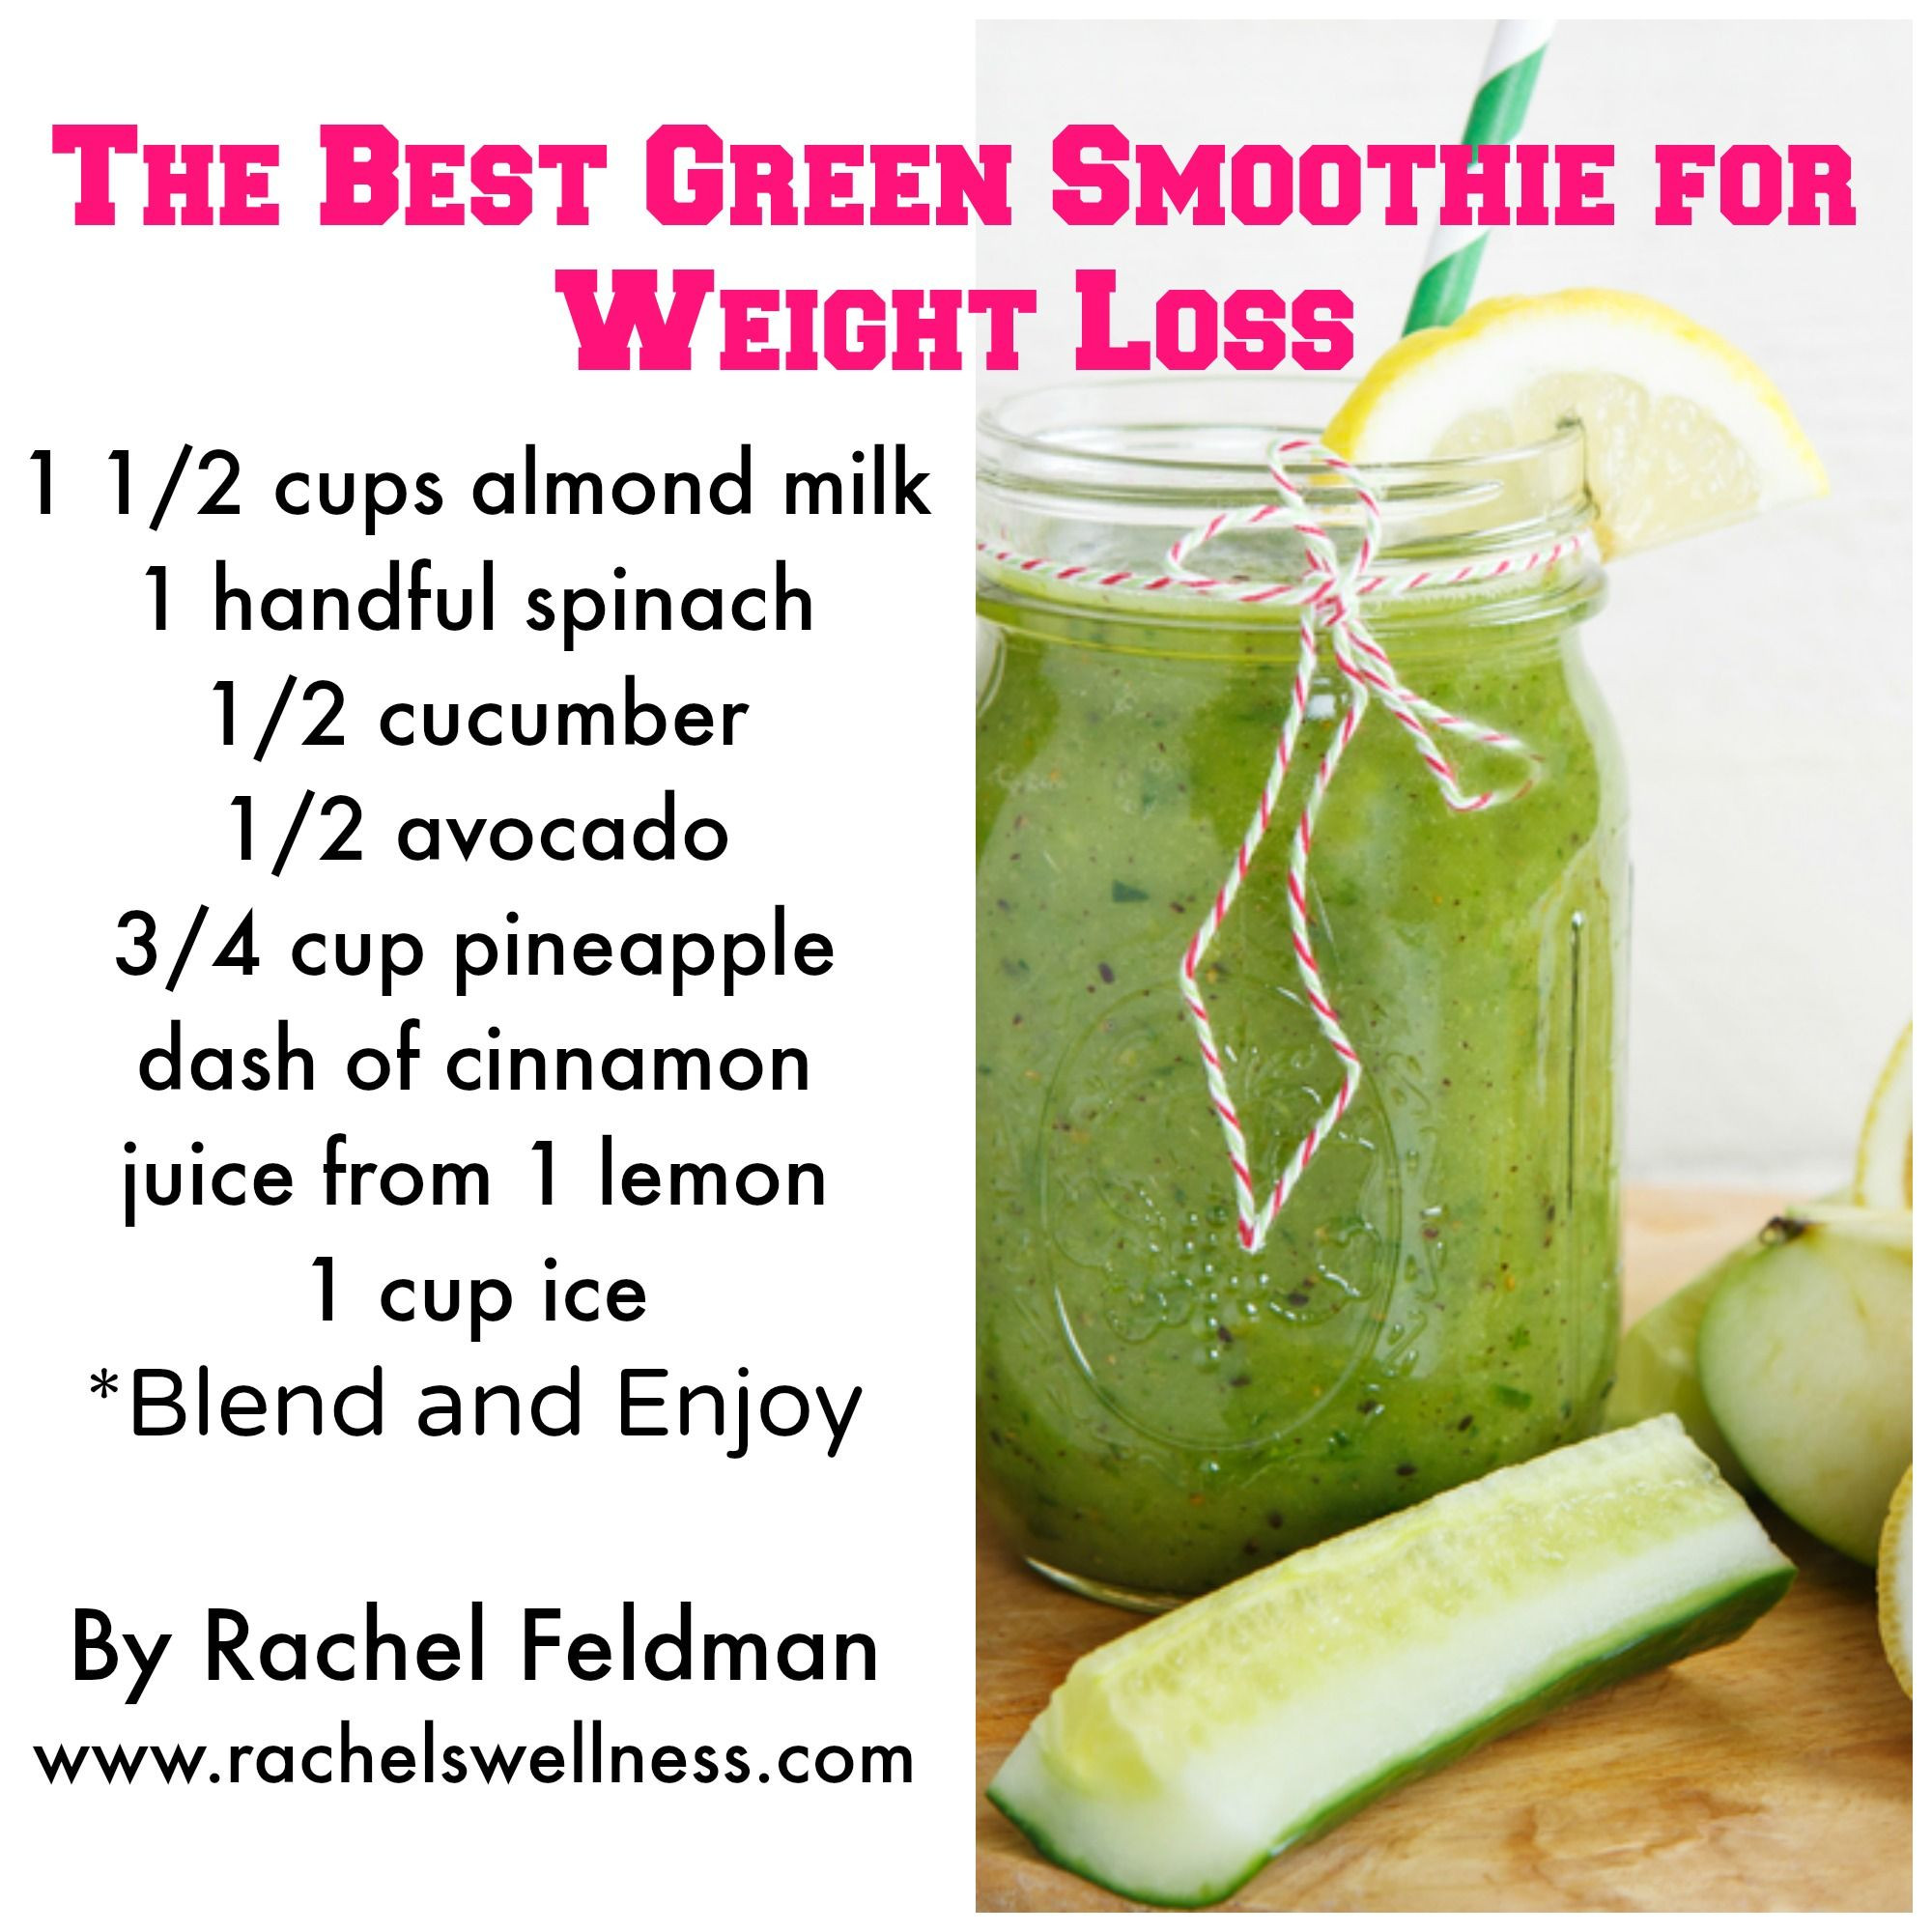 Vegetable Smoothie Recipes For Weight Loss
 7 Healthy Green Smoothie Recipes For Weight Loss